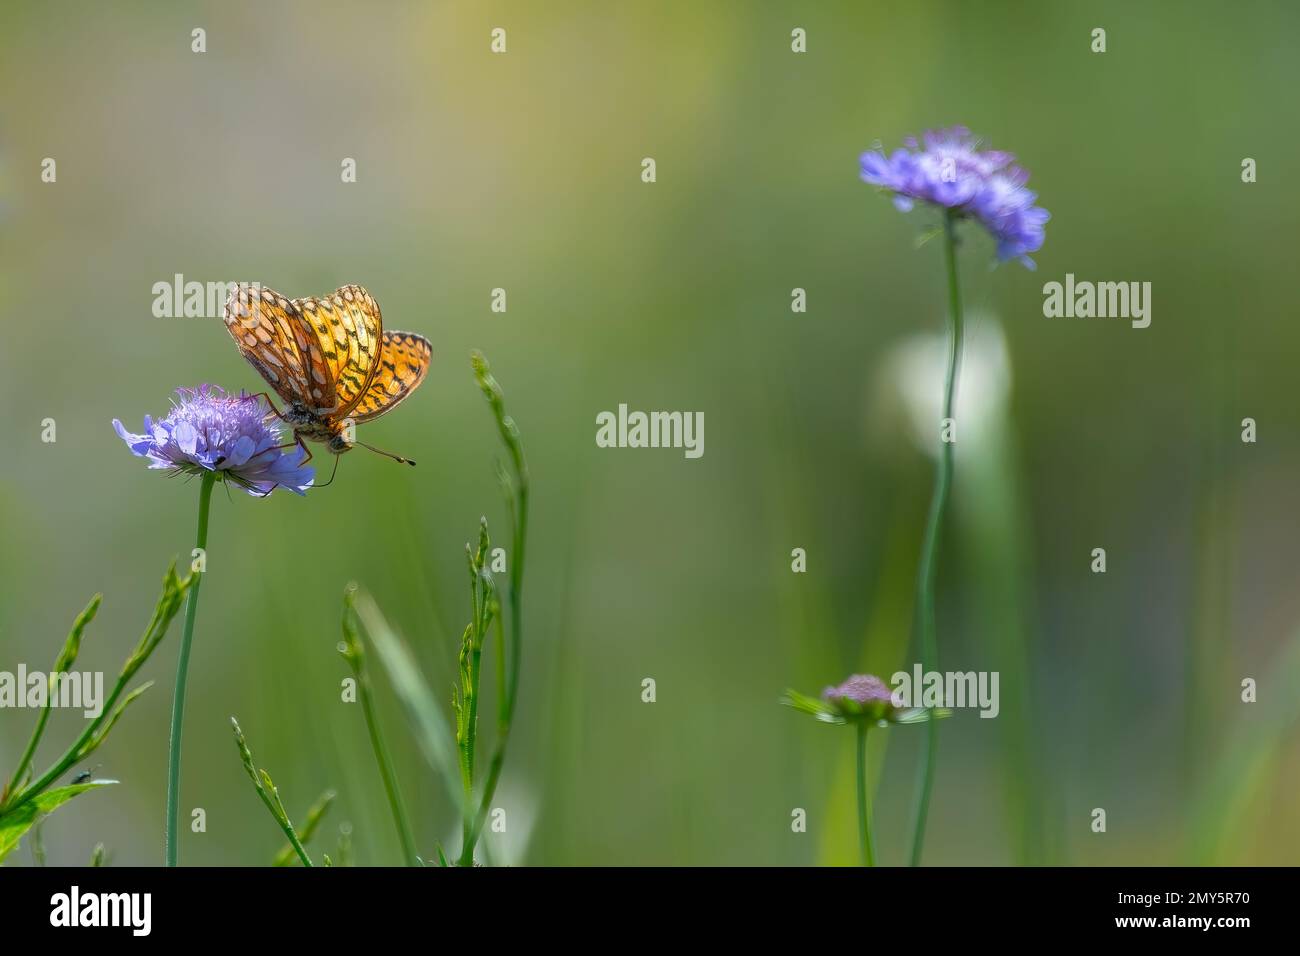 A selective focus of a lesser marbled fritillary butterfly standing on small scabious, blurred background Stock Photo